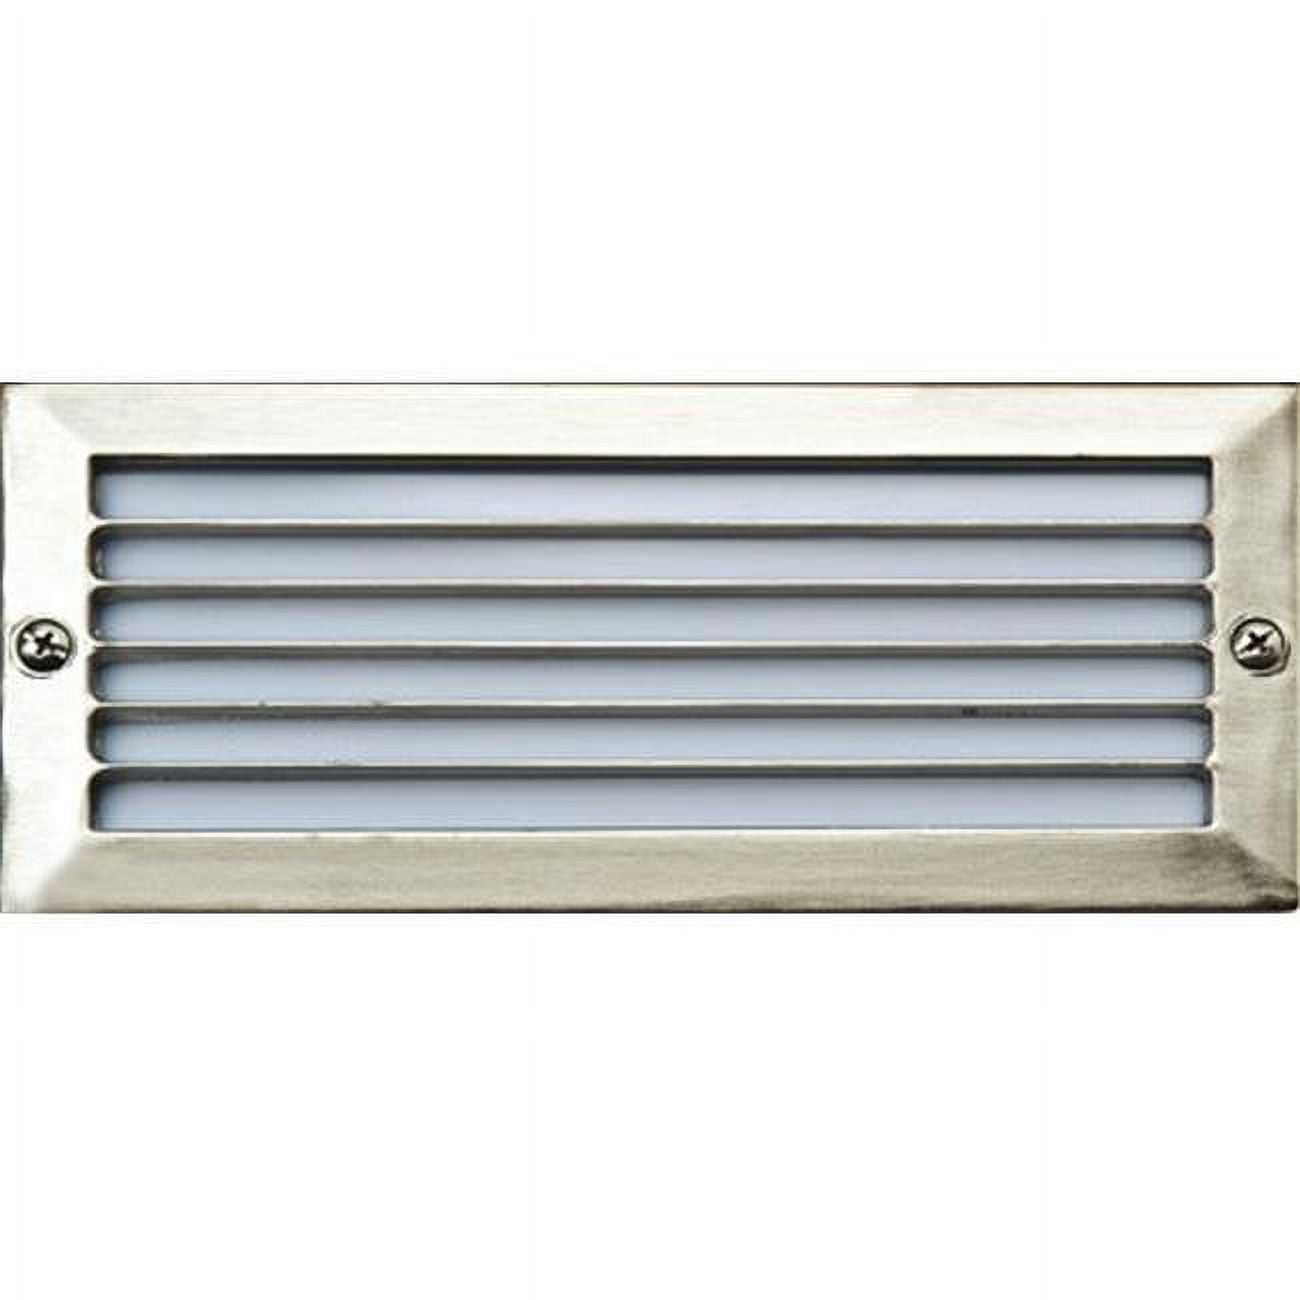 Picture of Dabmar Lighting LV601-SS Cast Aluminum Recessed Louvered Brick, Step & Wall Light, Electro-Plated Stainless Steel - 4 x 9.13 x 3.25 in.